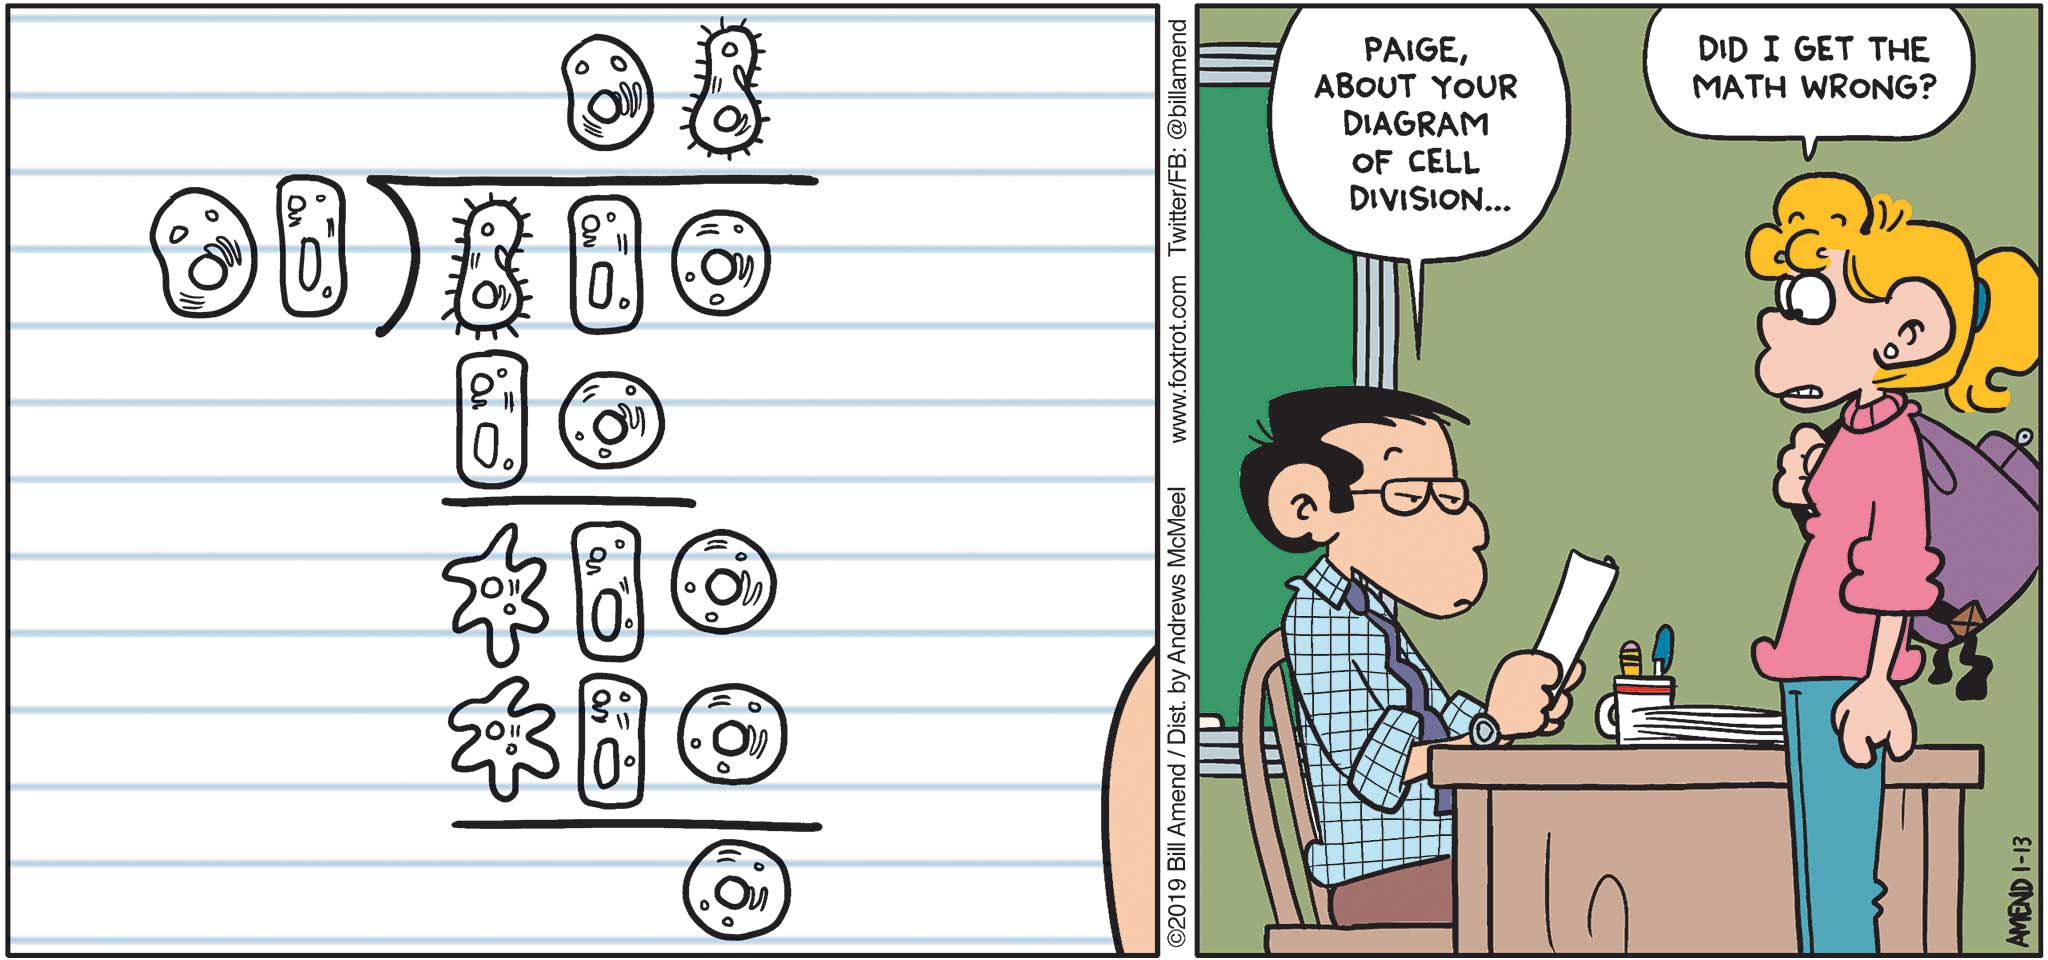 FoxTrot by Bill Amend - "Cell Division" published January 13, 2019 - Teacher says: Paige, about your diagram of cell division... Paige says: Did I get the math wrong? 